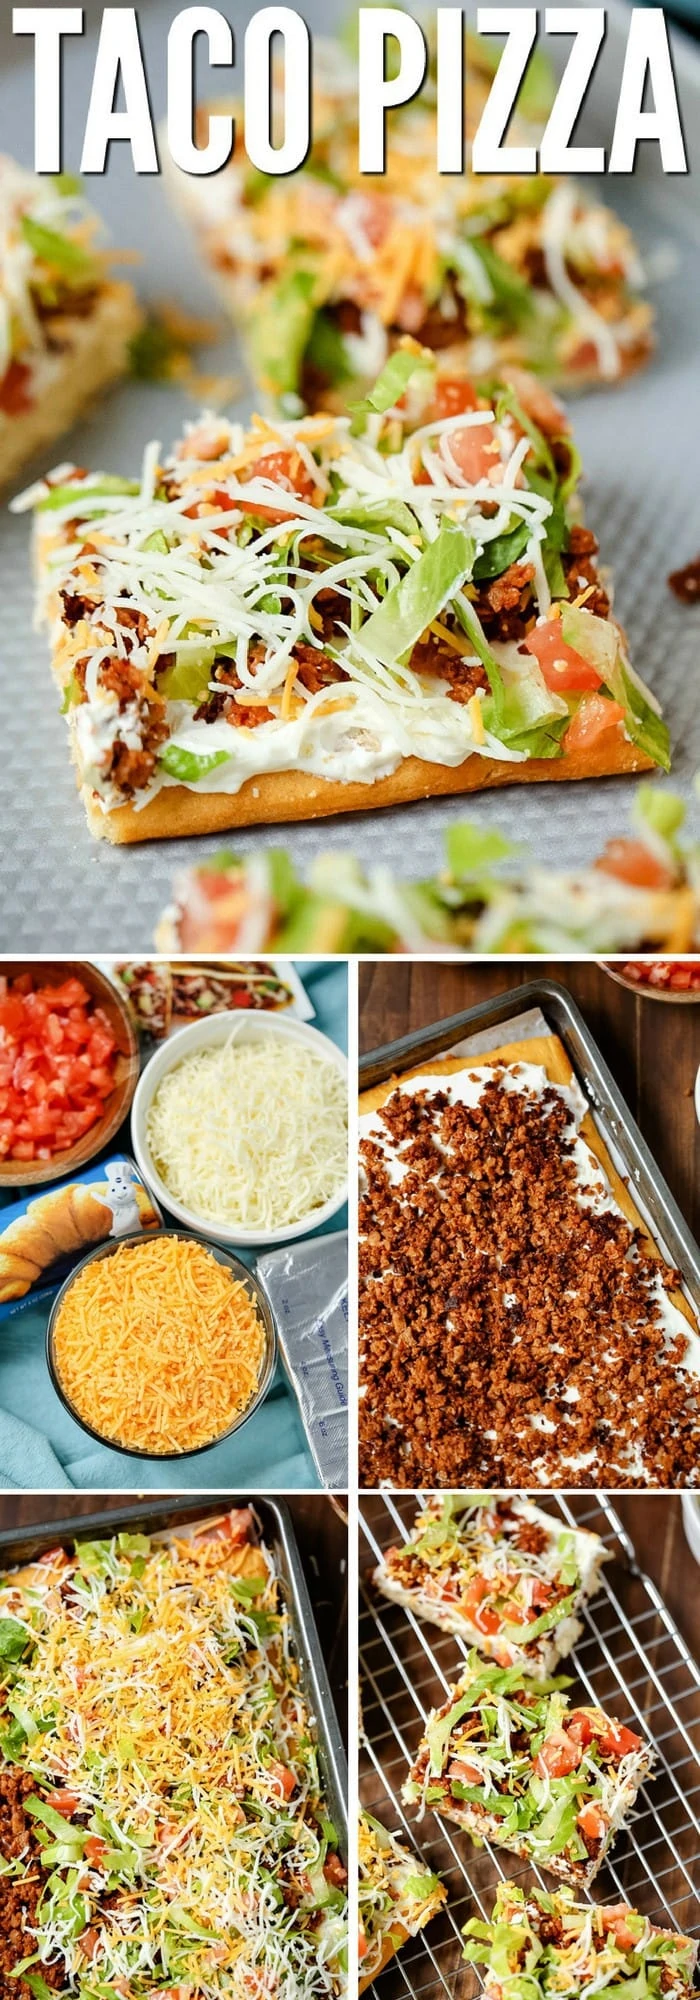 Homemade taco pizza topped with sour cream, ground beef, lettuce, tomatoes and cheese.